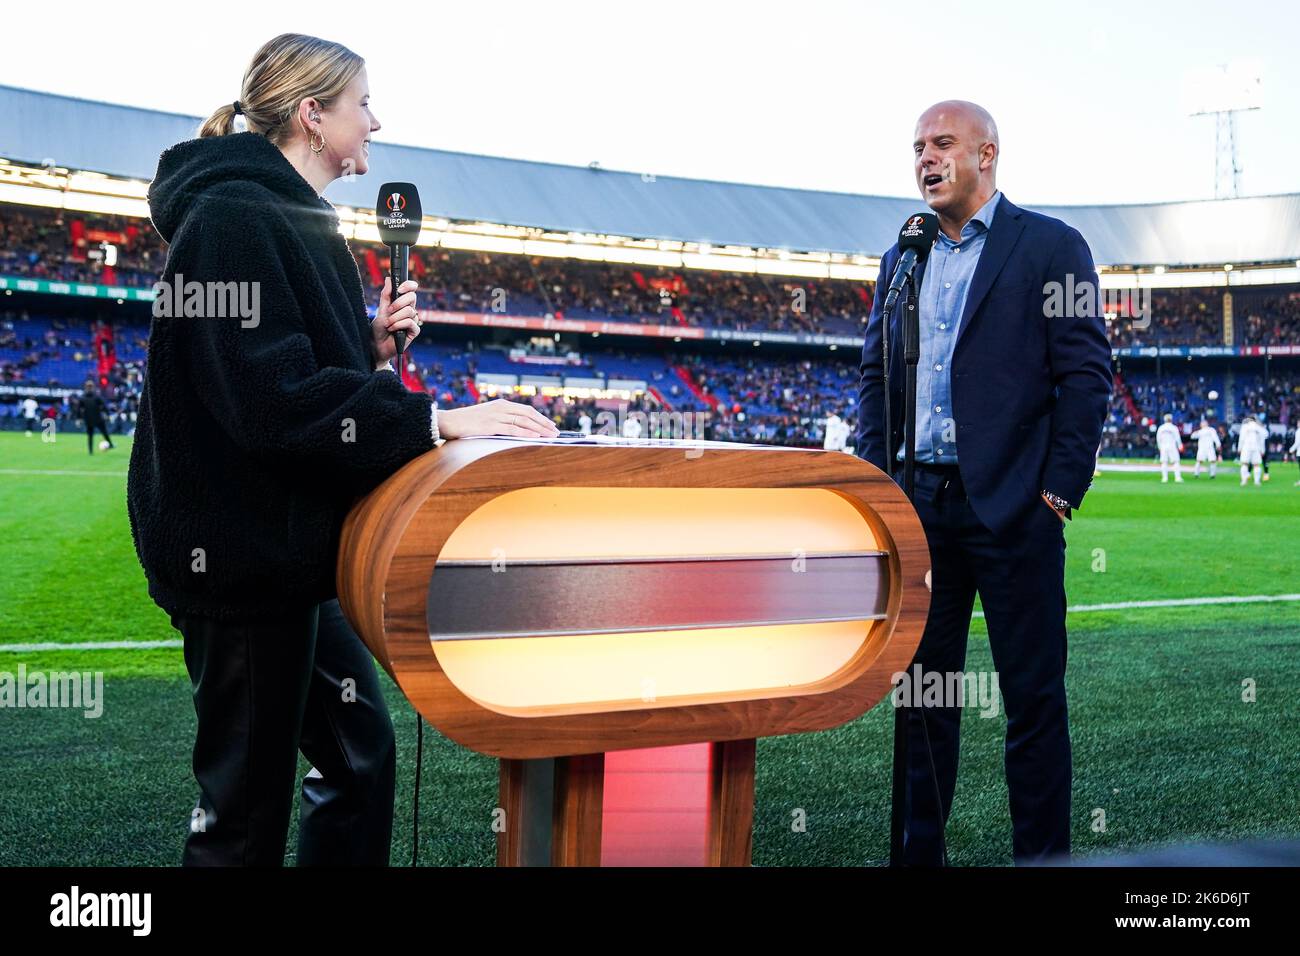 Rotterdam, The Netherlands.13 October 2022,  Rotterdam, The Netherlands.13 October 2022,  Rotterdam - Noa Vahle, Feyenoord coach Arne Slot during the match between Feyenoord v FC Midtjylland at Stadion Feijenoord De Kuip on 13 October 2022 in Rotterdam, The Netherlands. (Box to Box Pictures/Yannick Verhoeven) Stock Photo